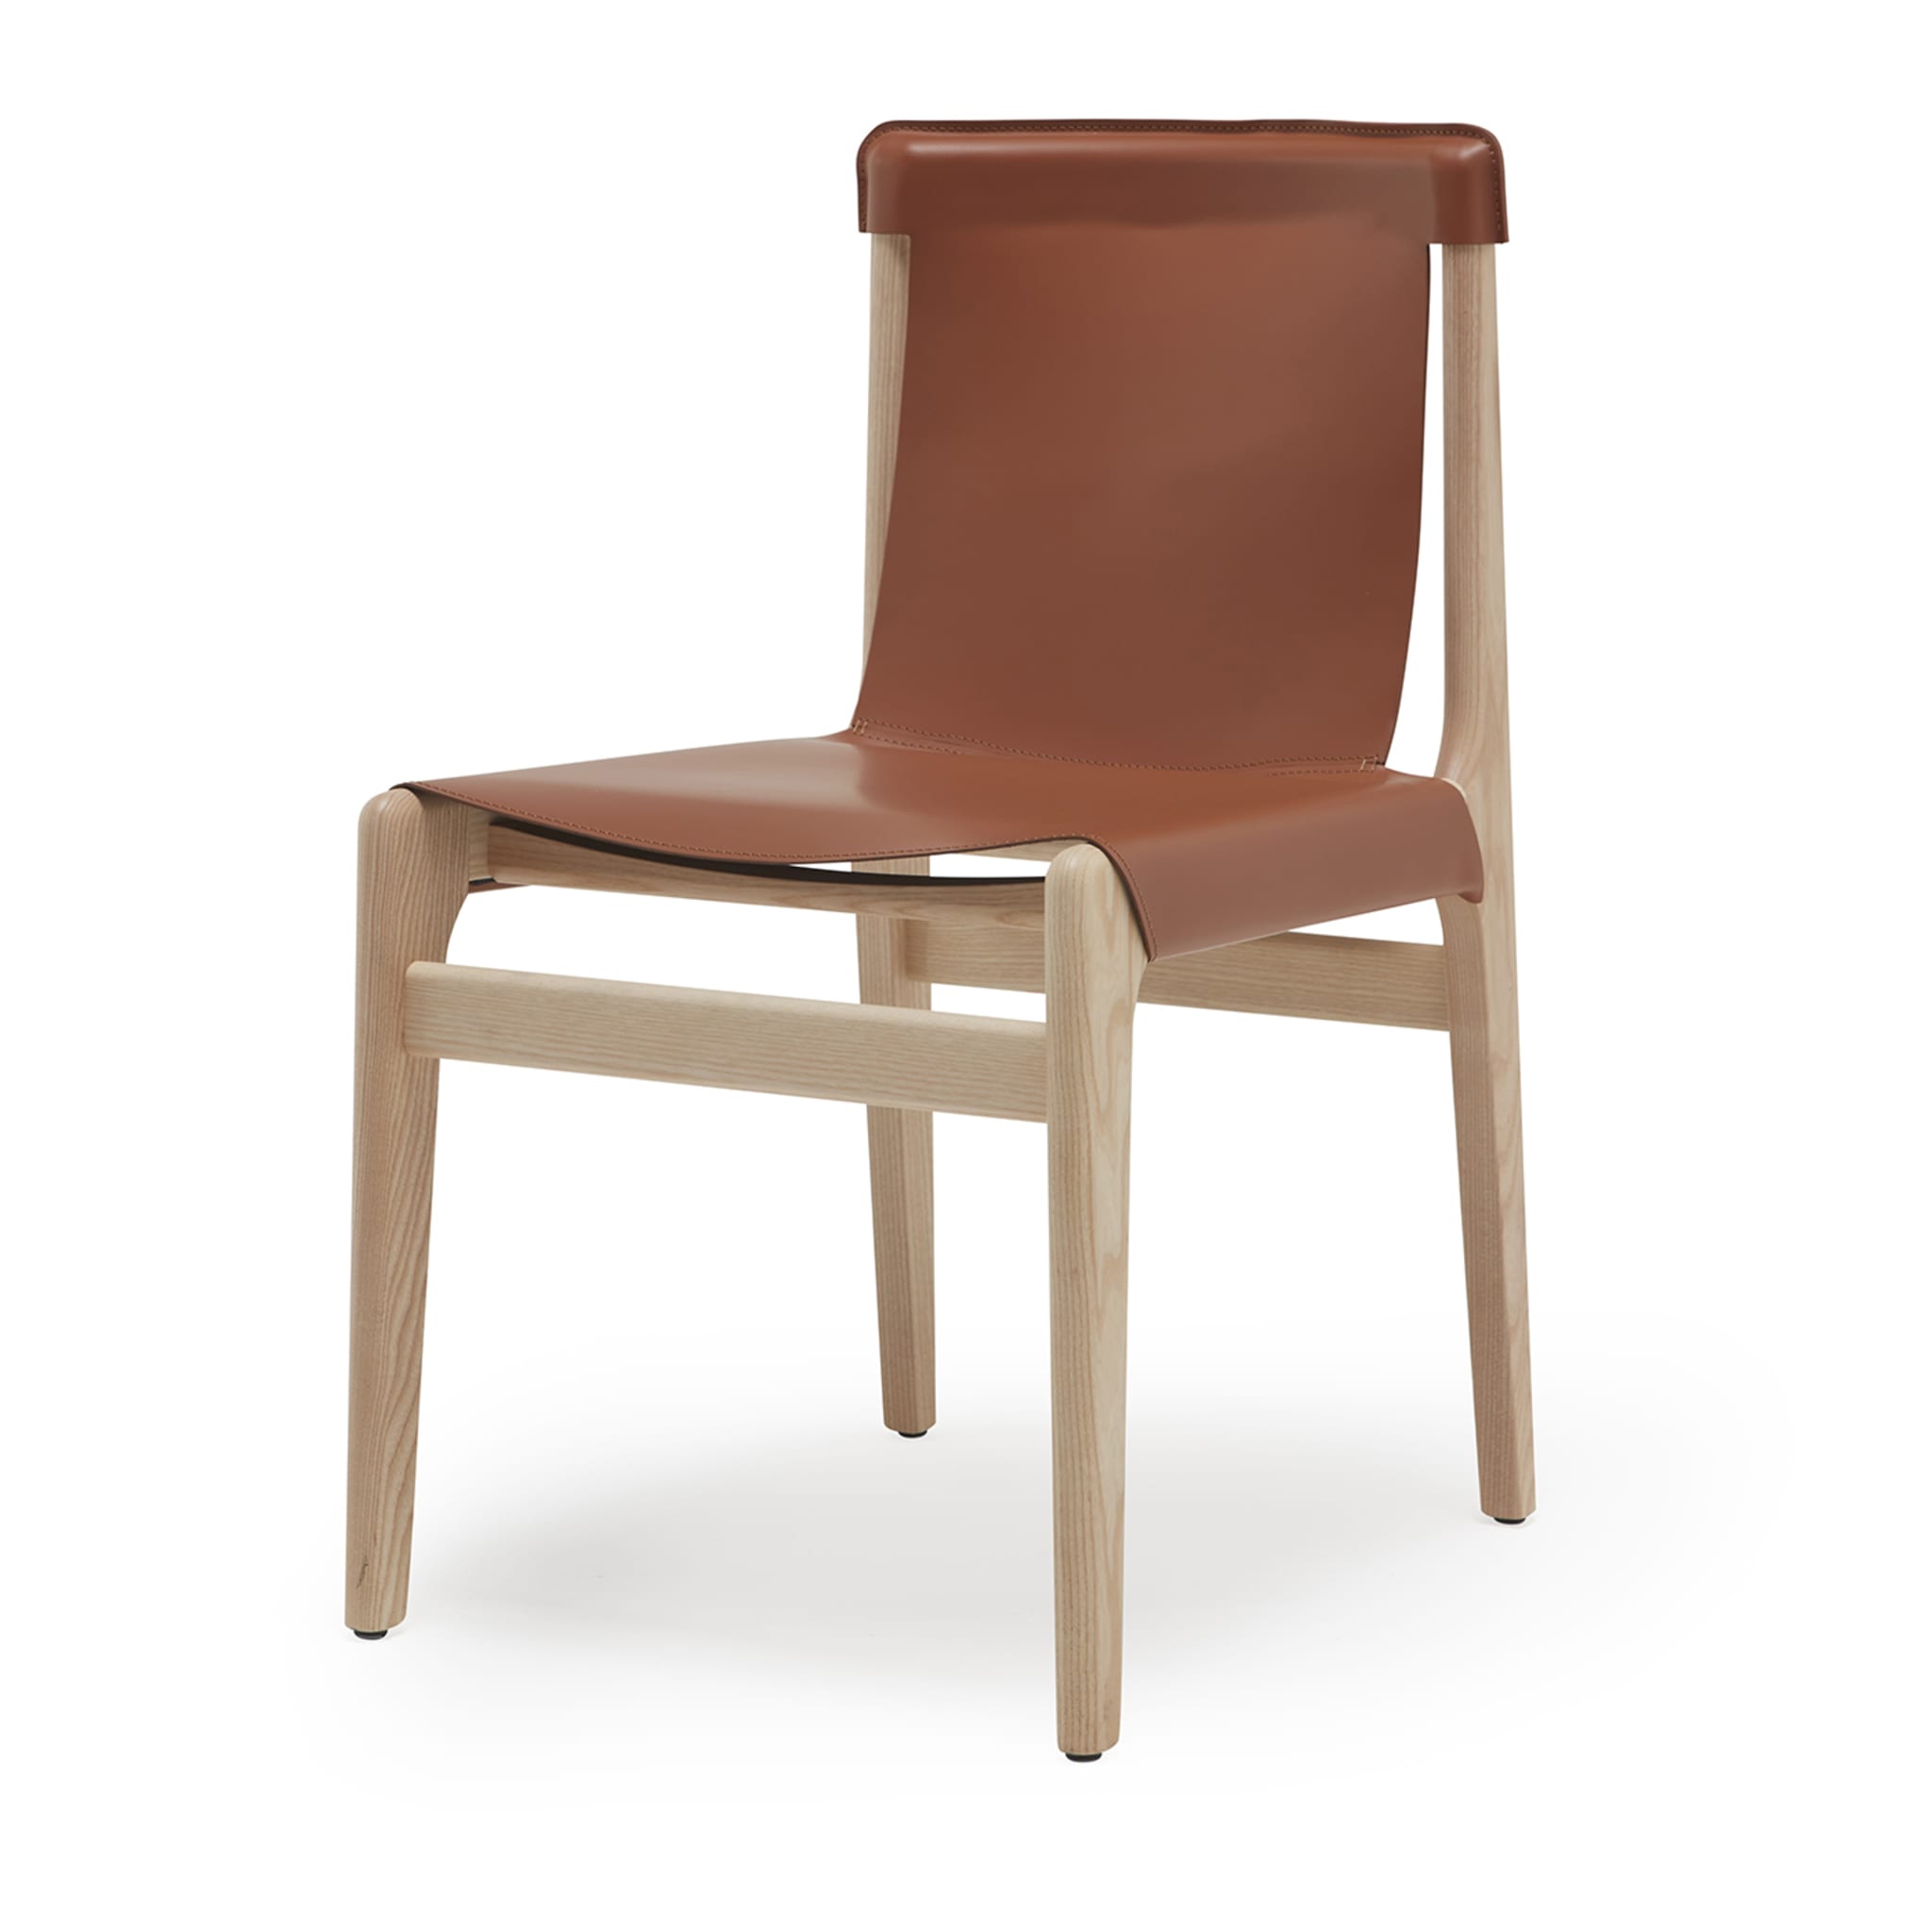 Burano Leather Chair by Balutto Associati - Alternative view 3